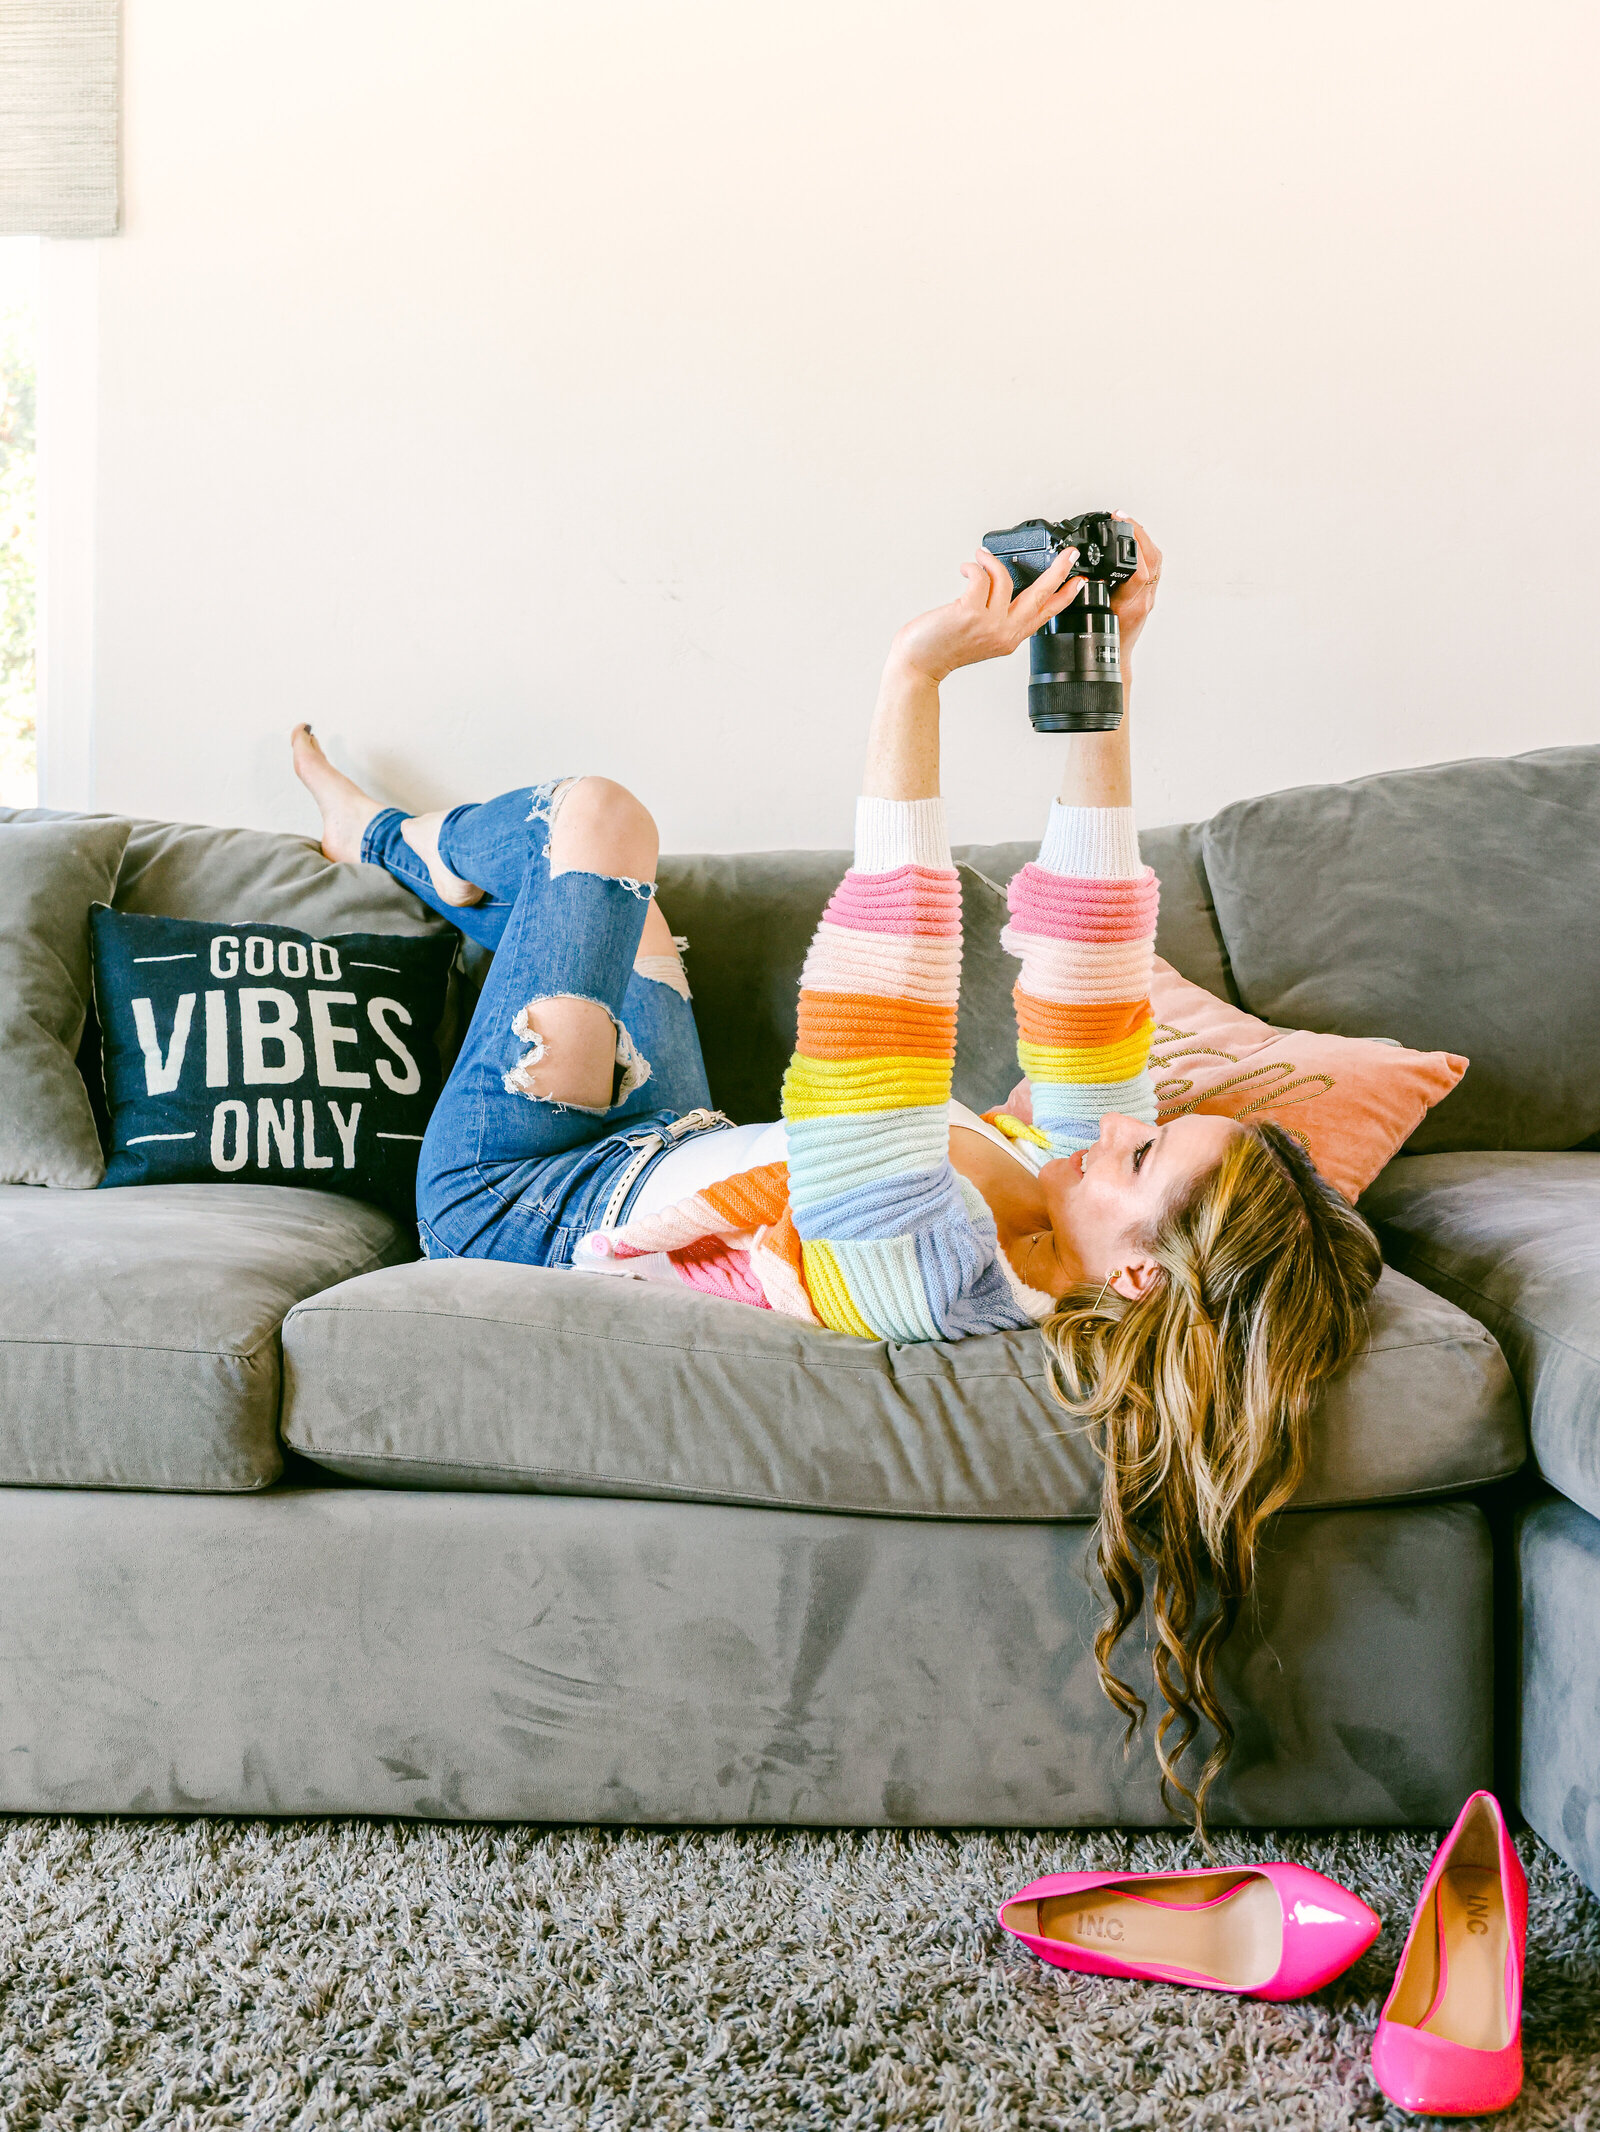 Girl sitting on couch taking selfie colorful sweater